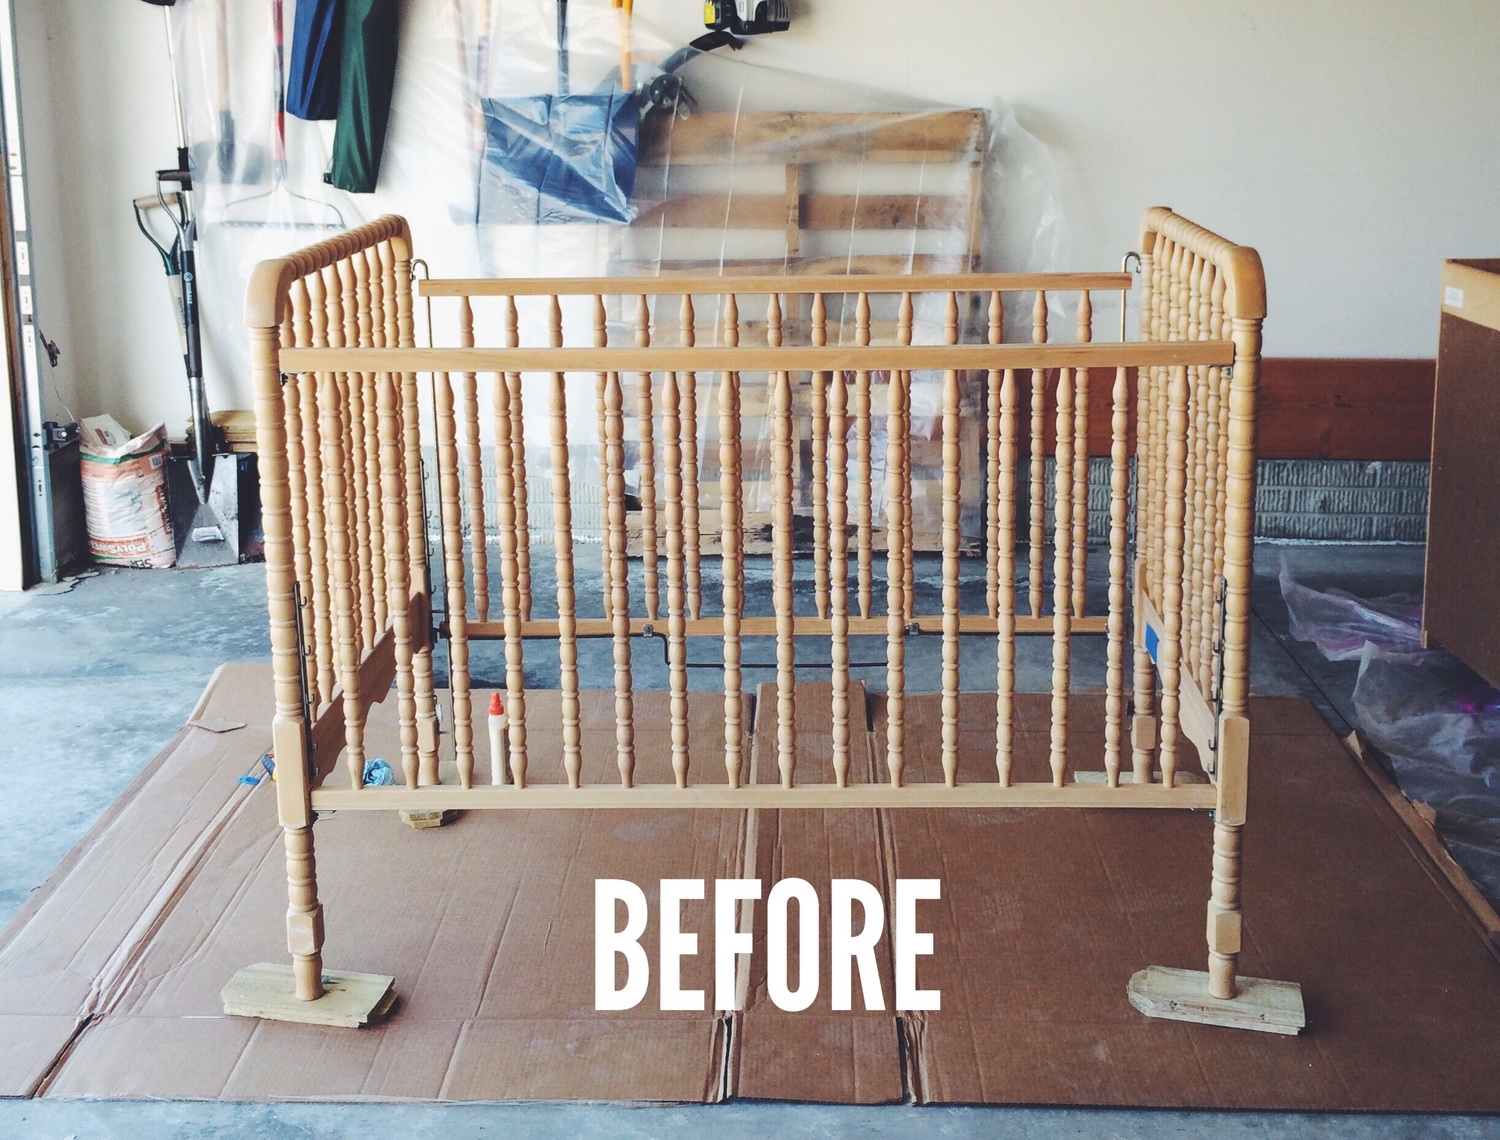 spray paint for baby crib